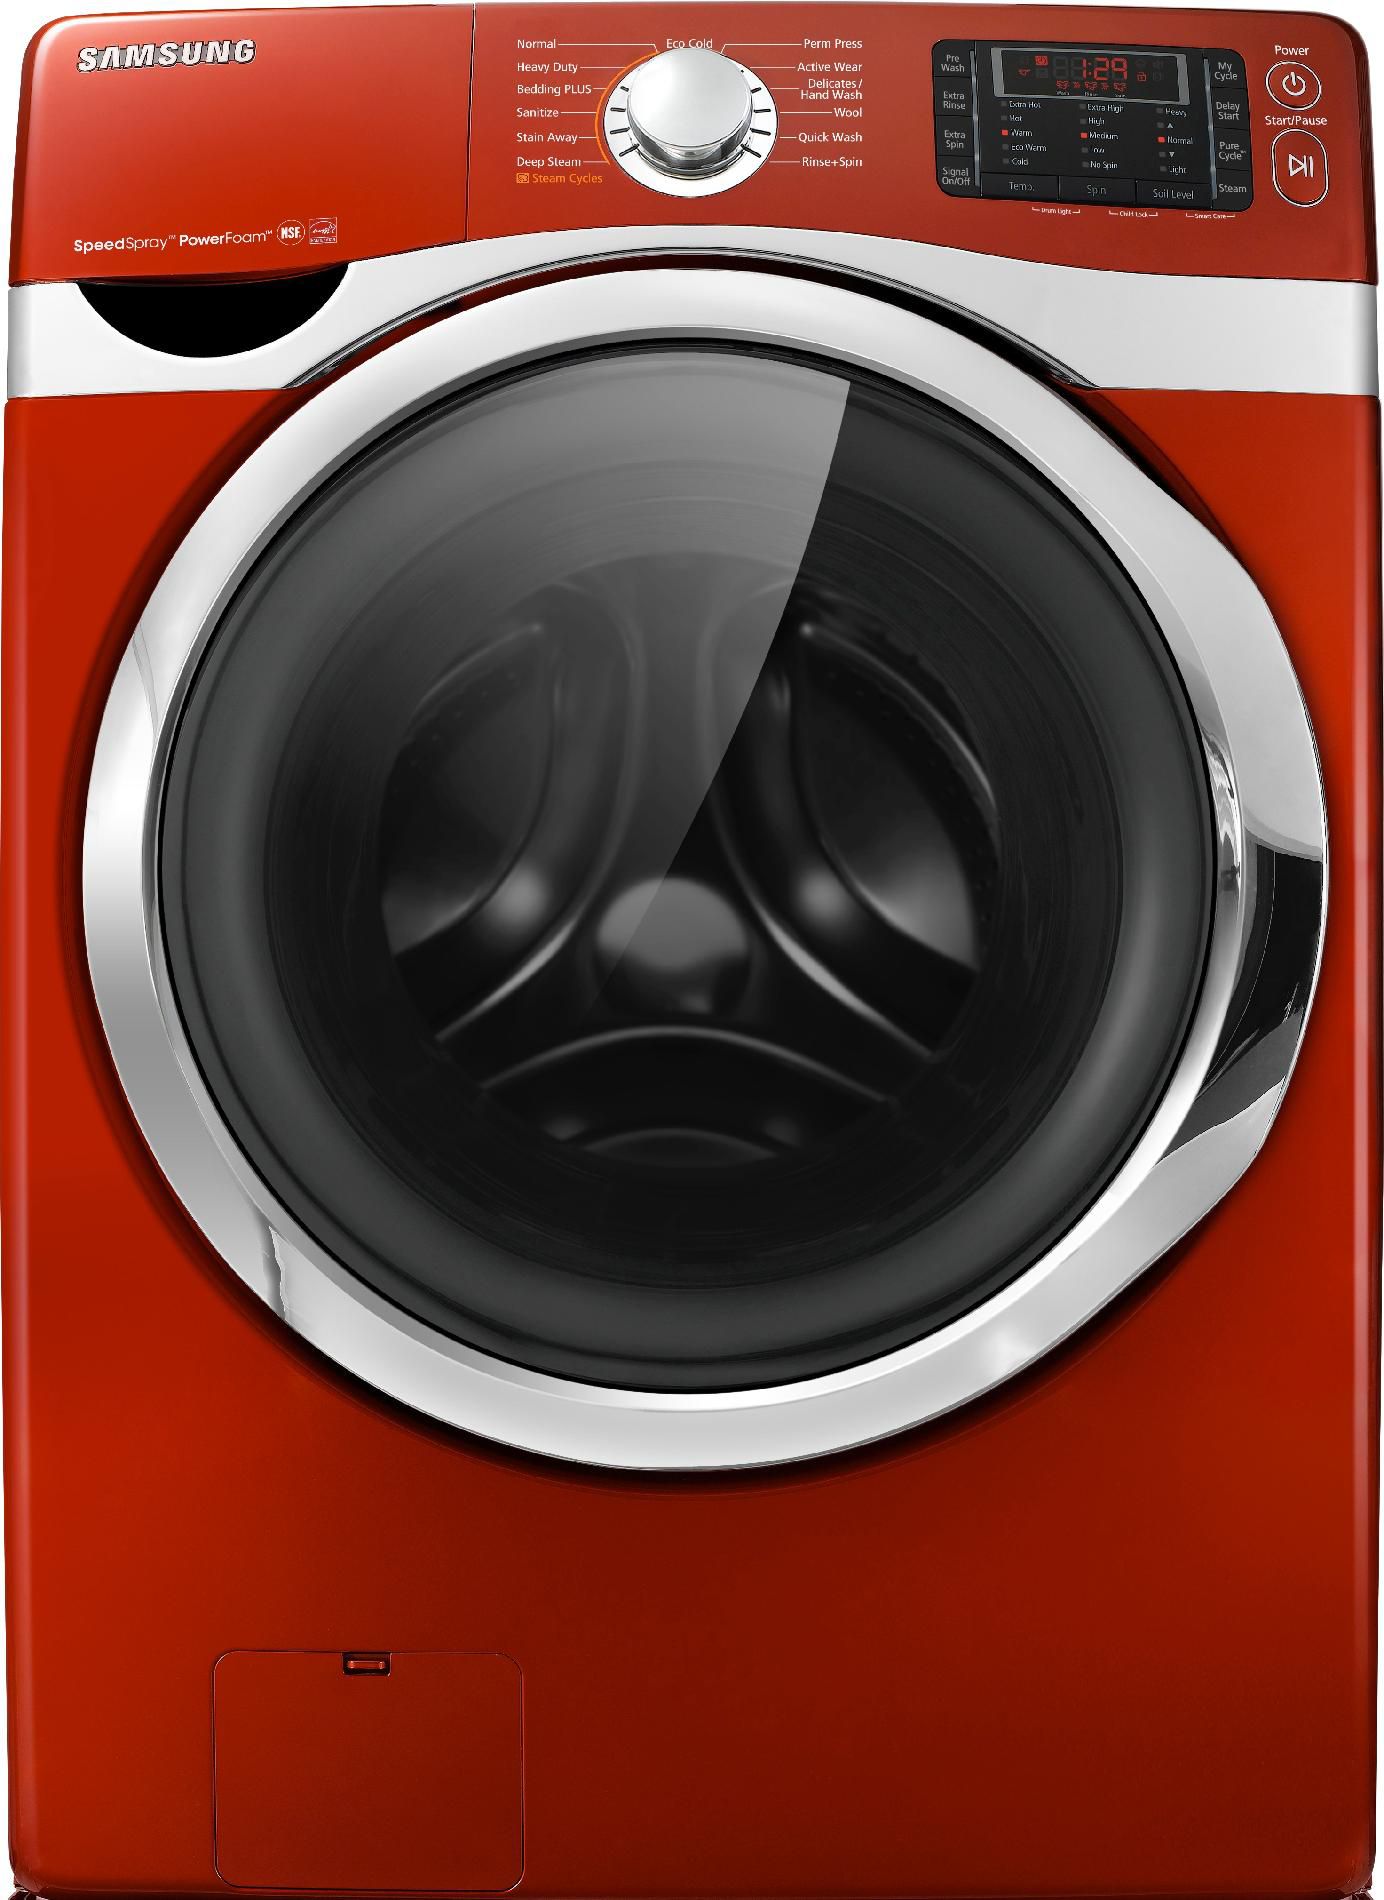 Samsung 4.3 cu. ft. Steam Front-Load Washer - Red